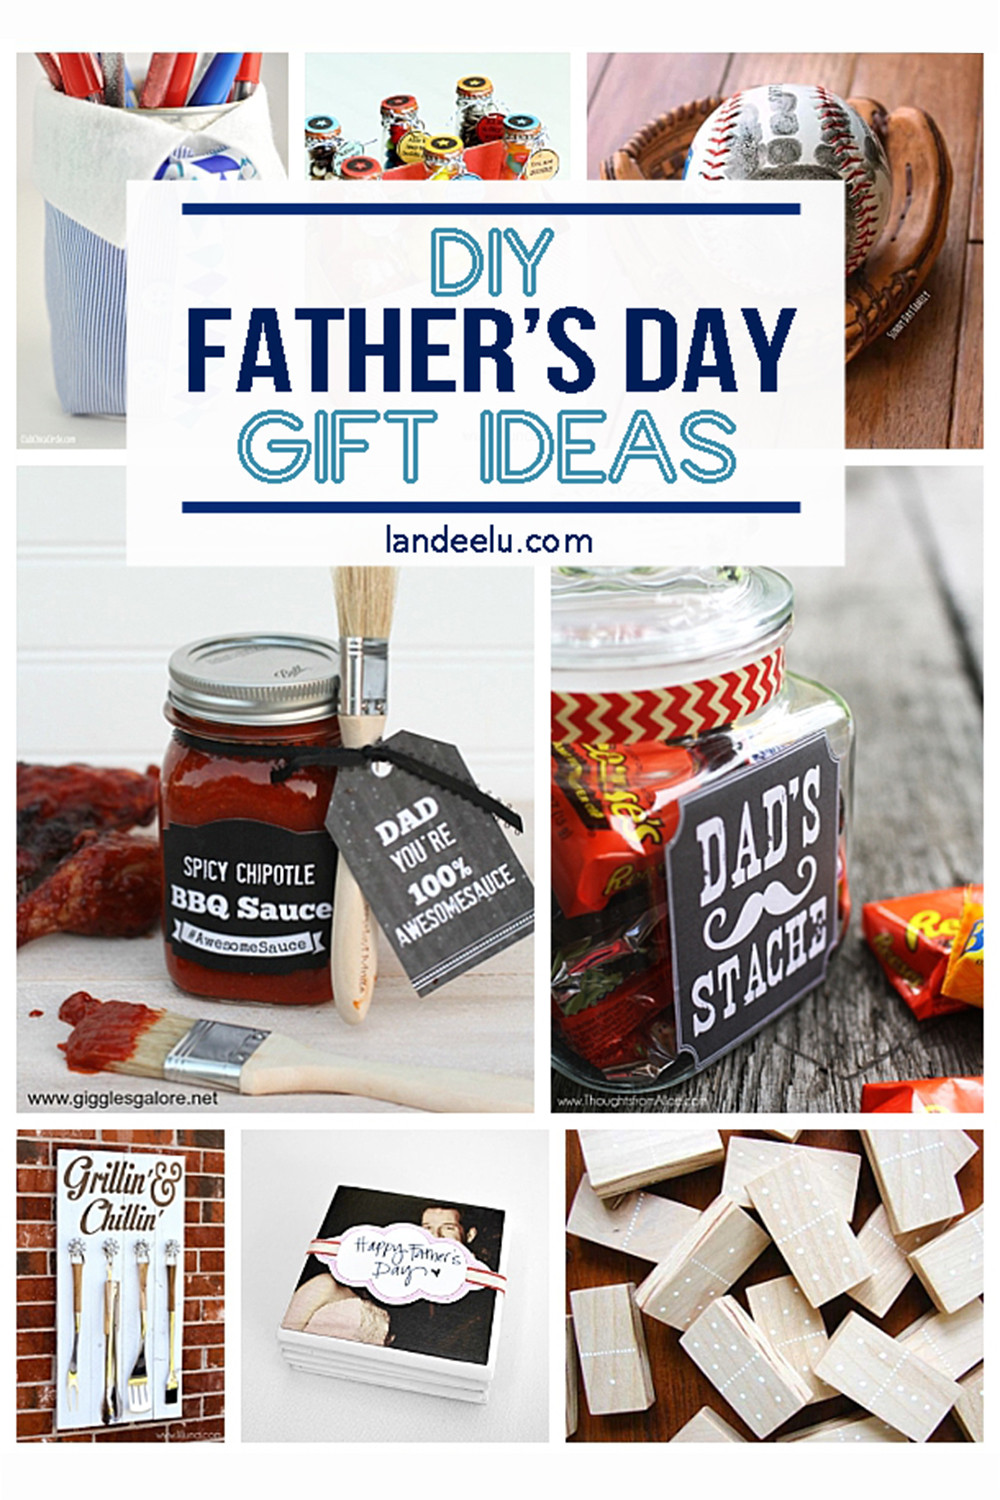 Best Fathers Day Gift Ideas
 21 DIY Father s Day Gifts to Celebrate Dad landeelu